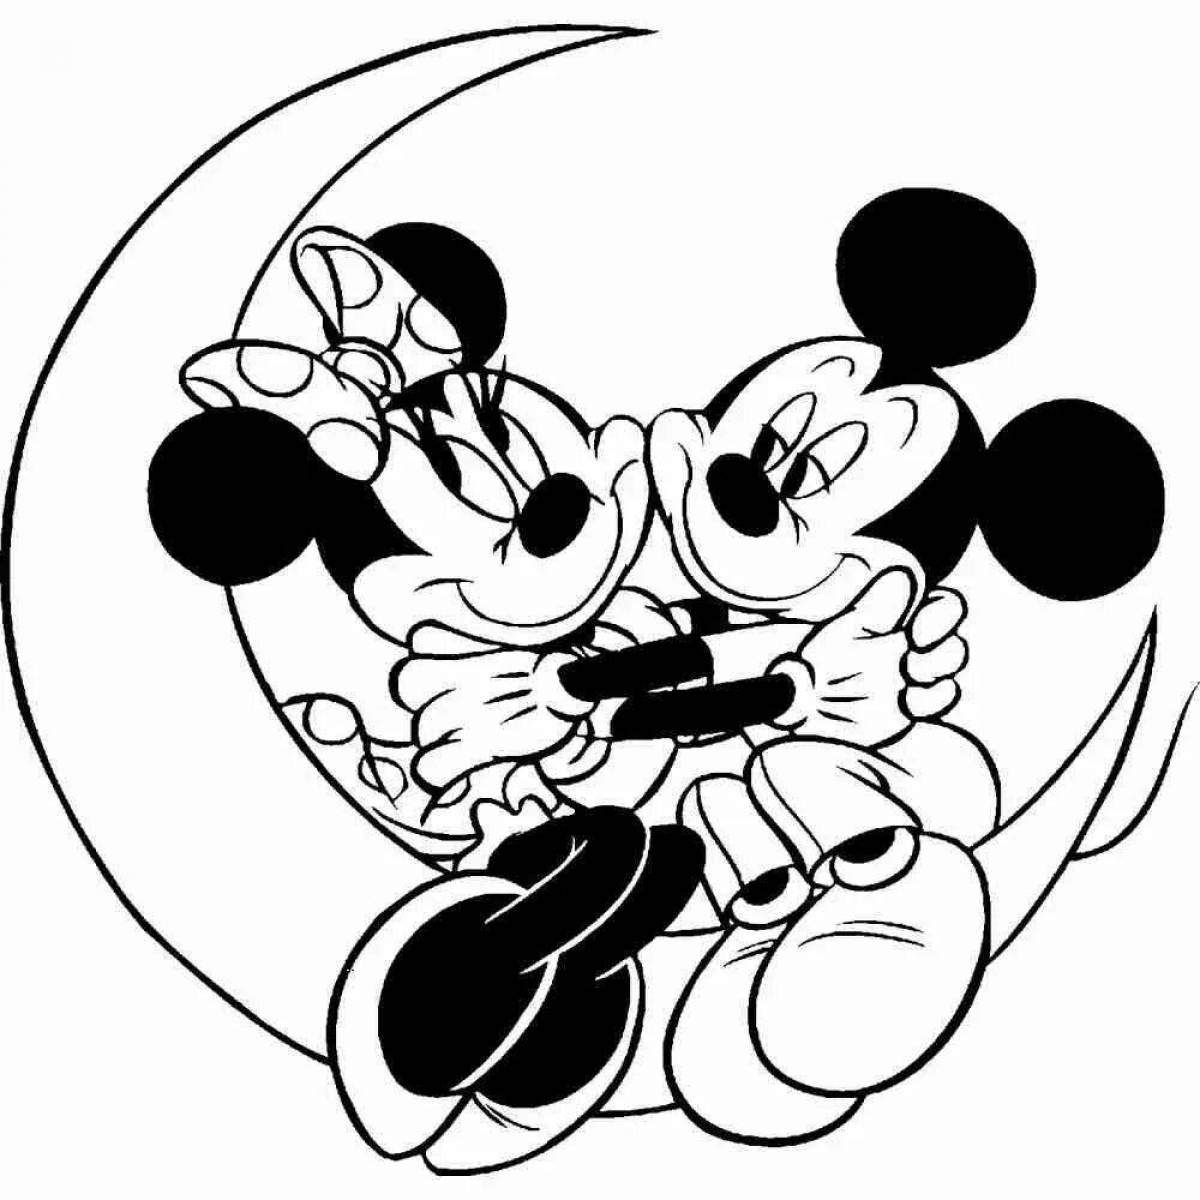 Coloring page charming minnie